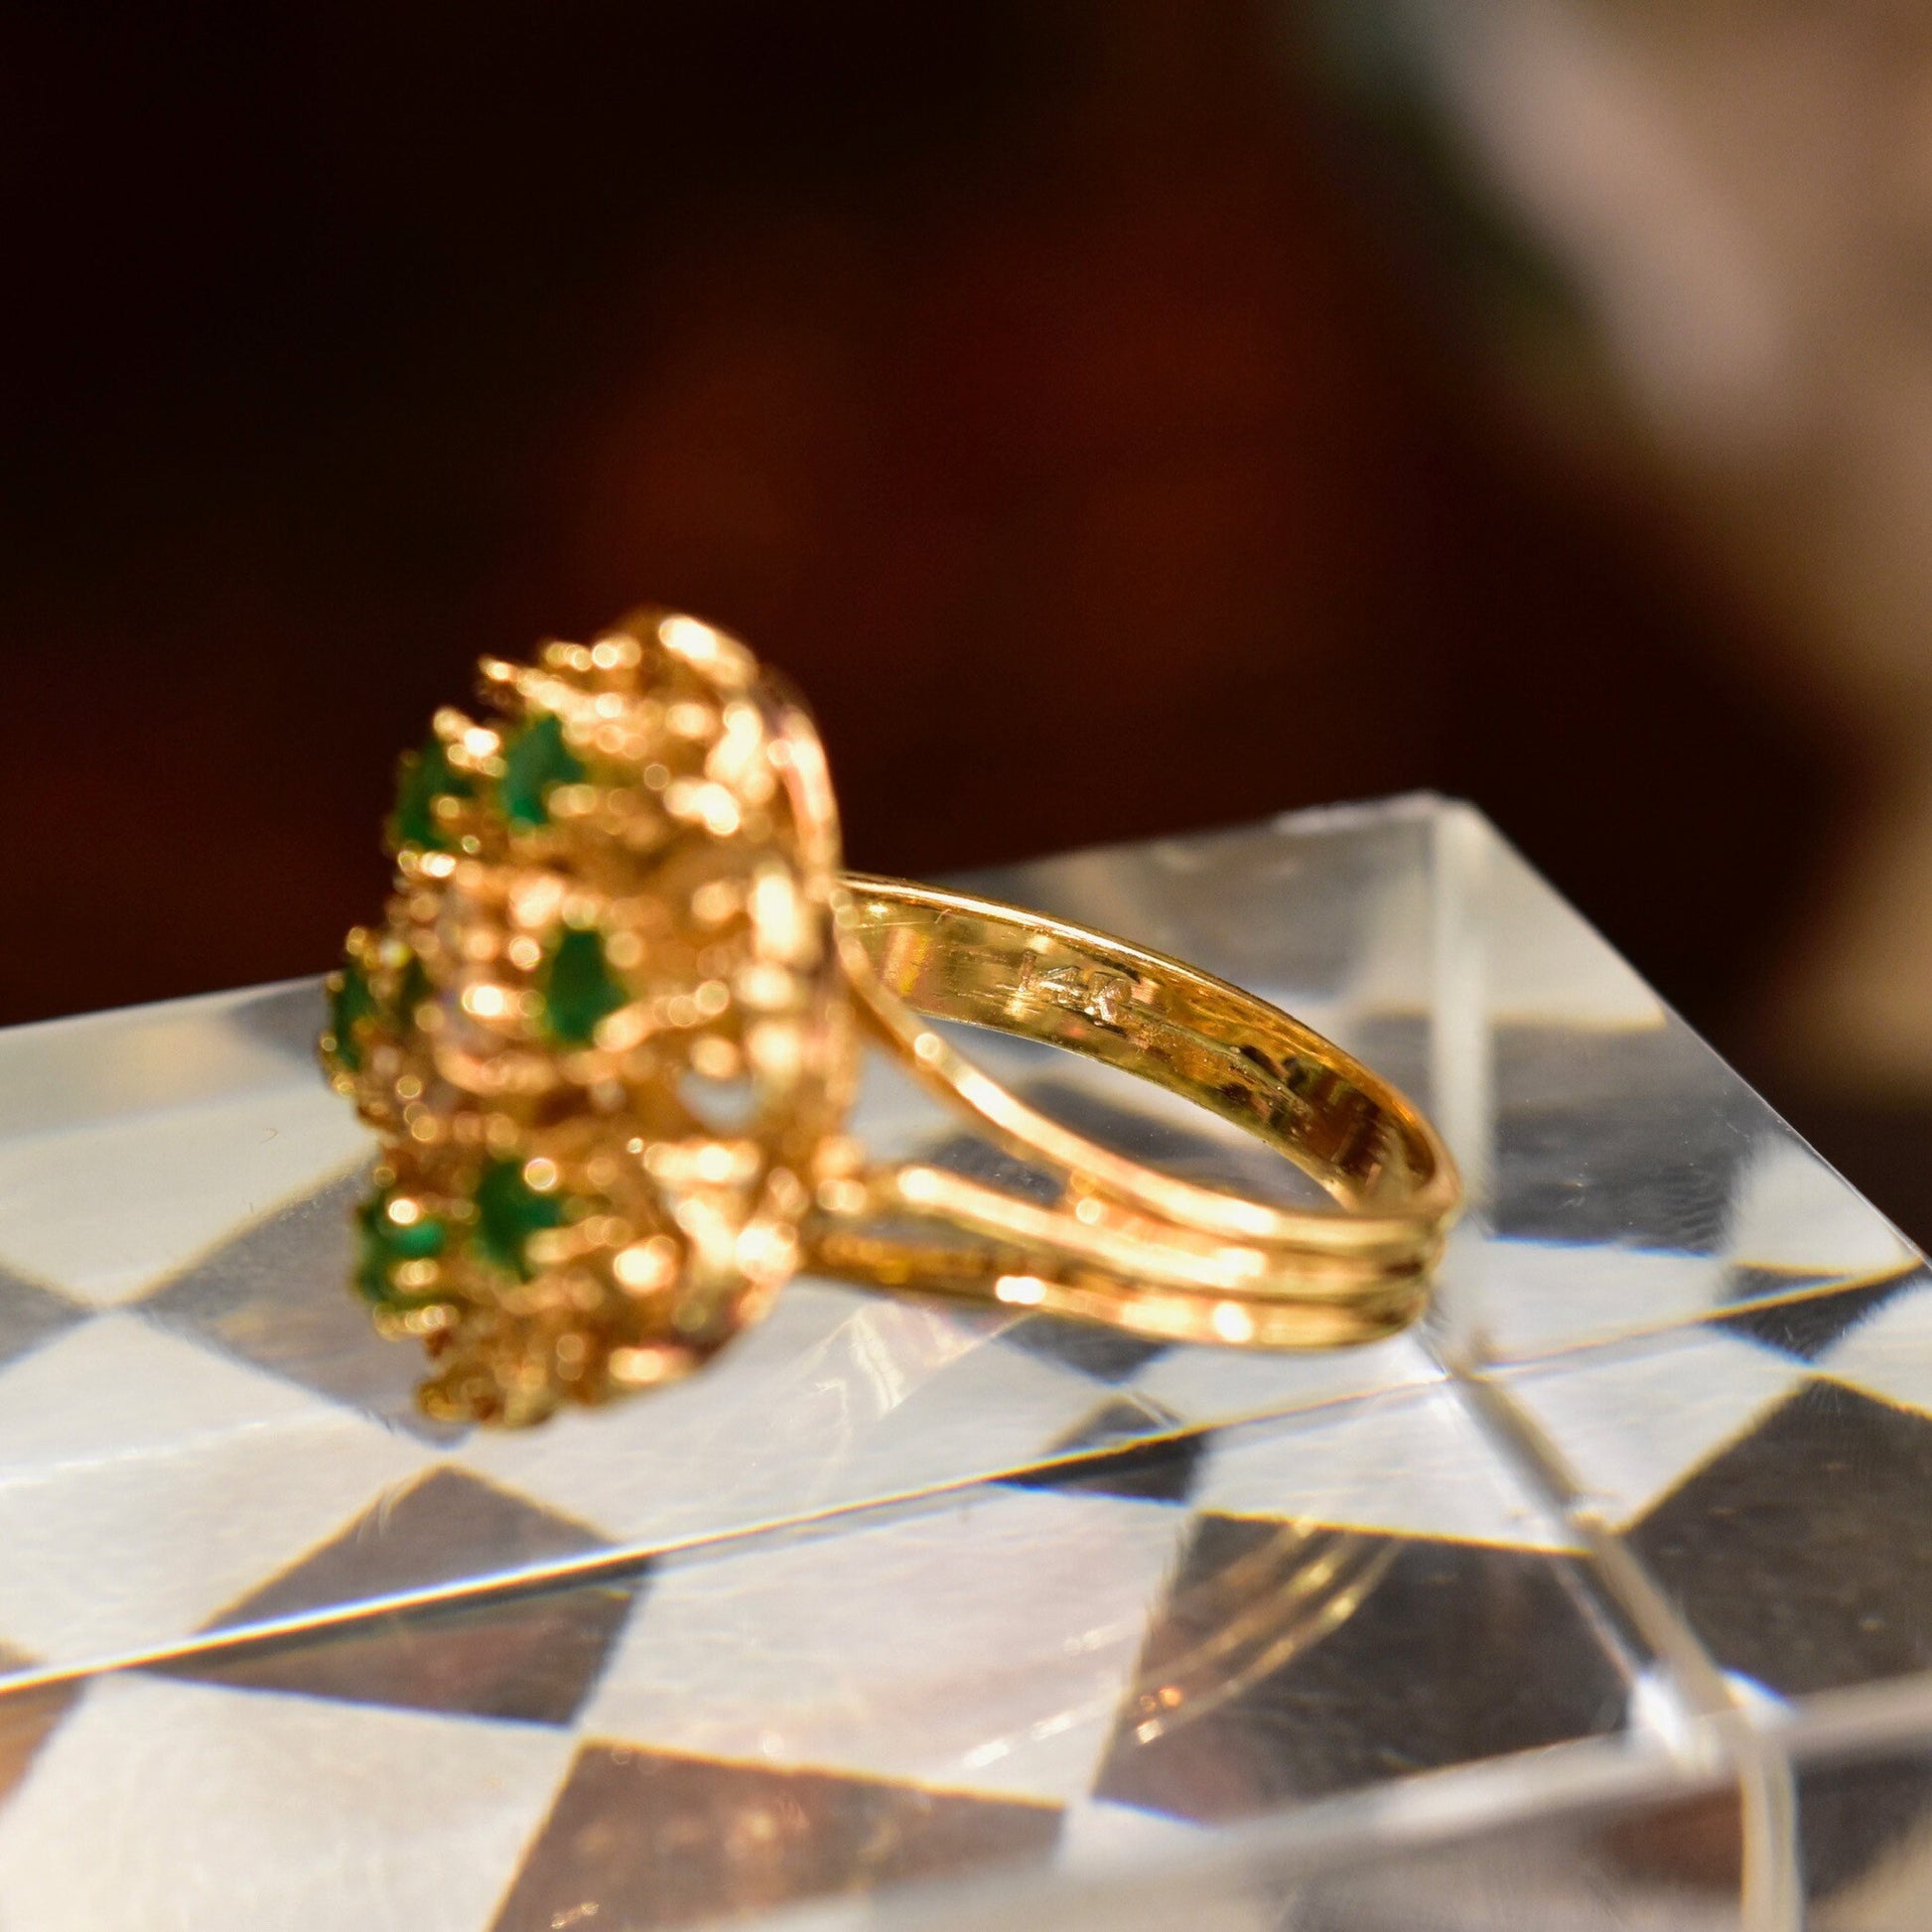 14K yellow gold emerald and diamond cluster dome cocktail ring, featuring green gemstones in a floral design, on a tiled surface, size 7 1/2 US.